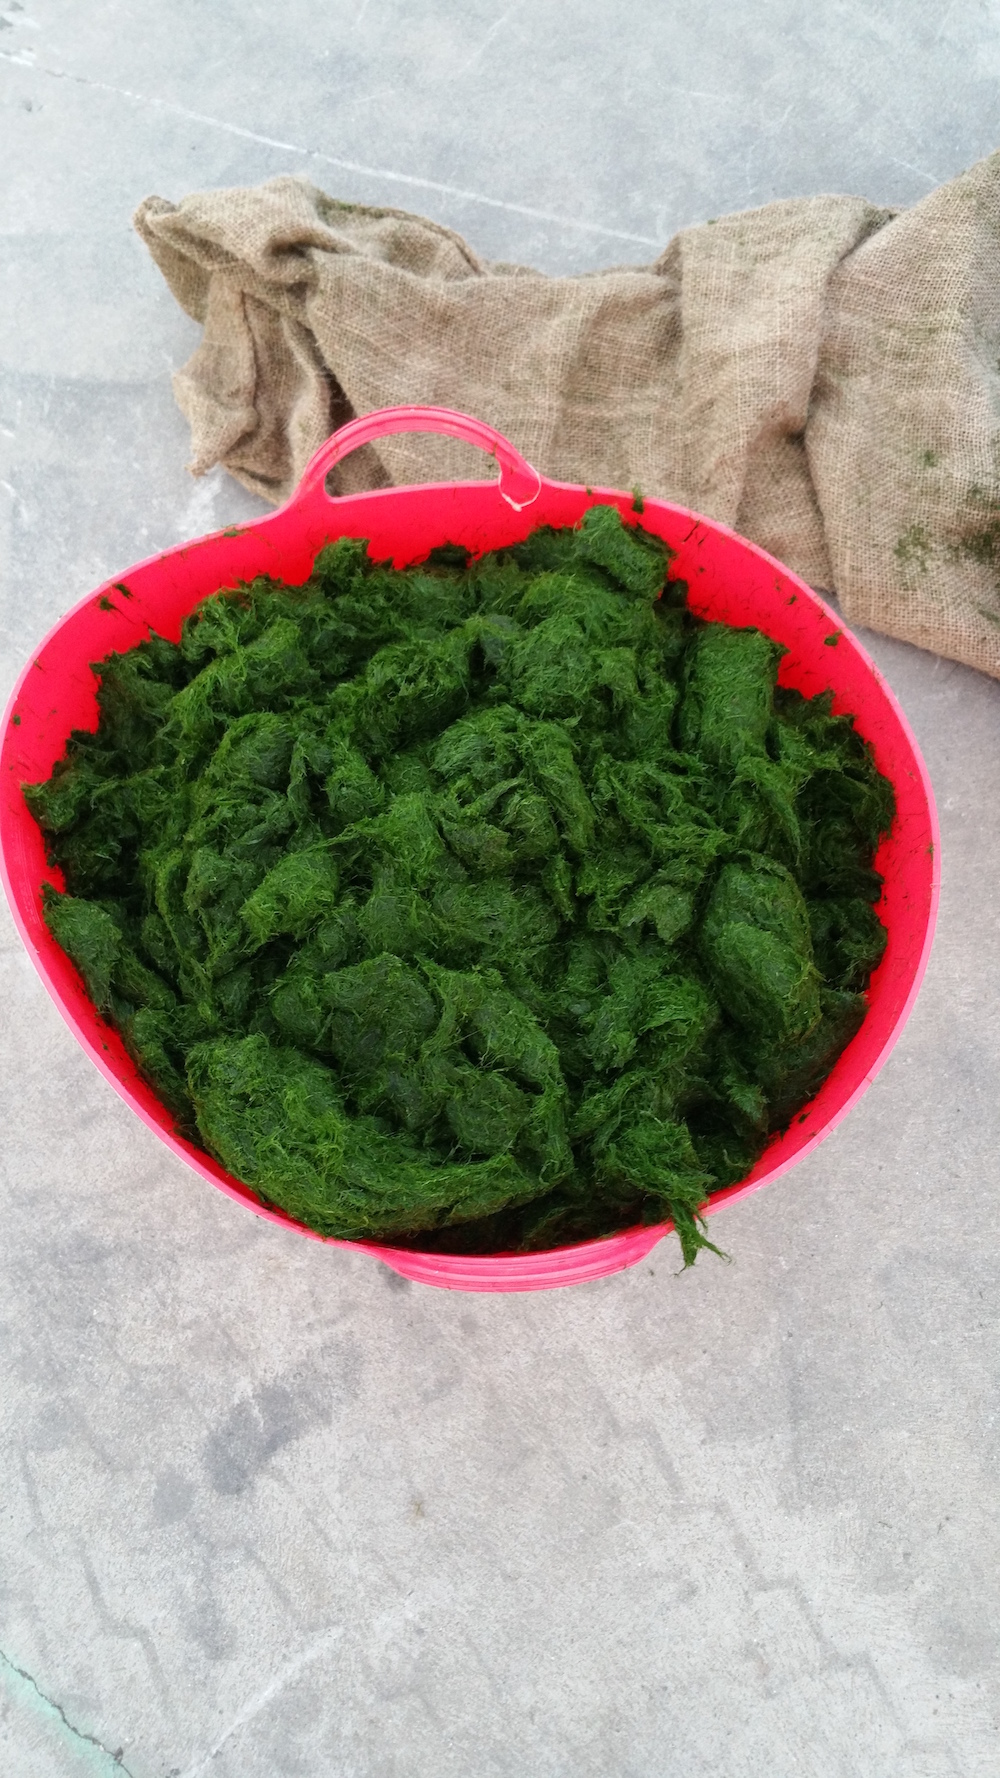 Pictured: Harvested Seaweed.